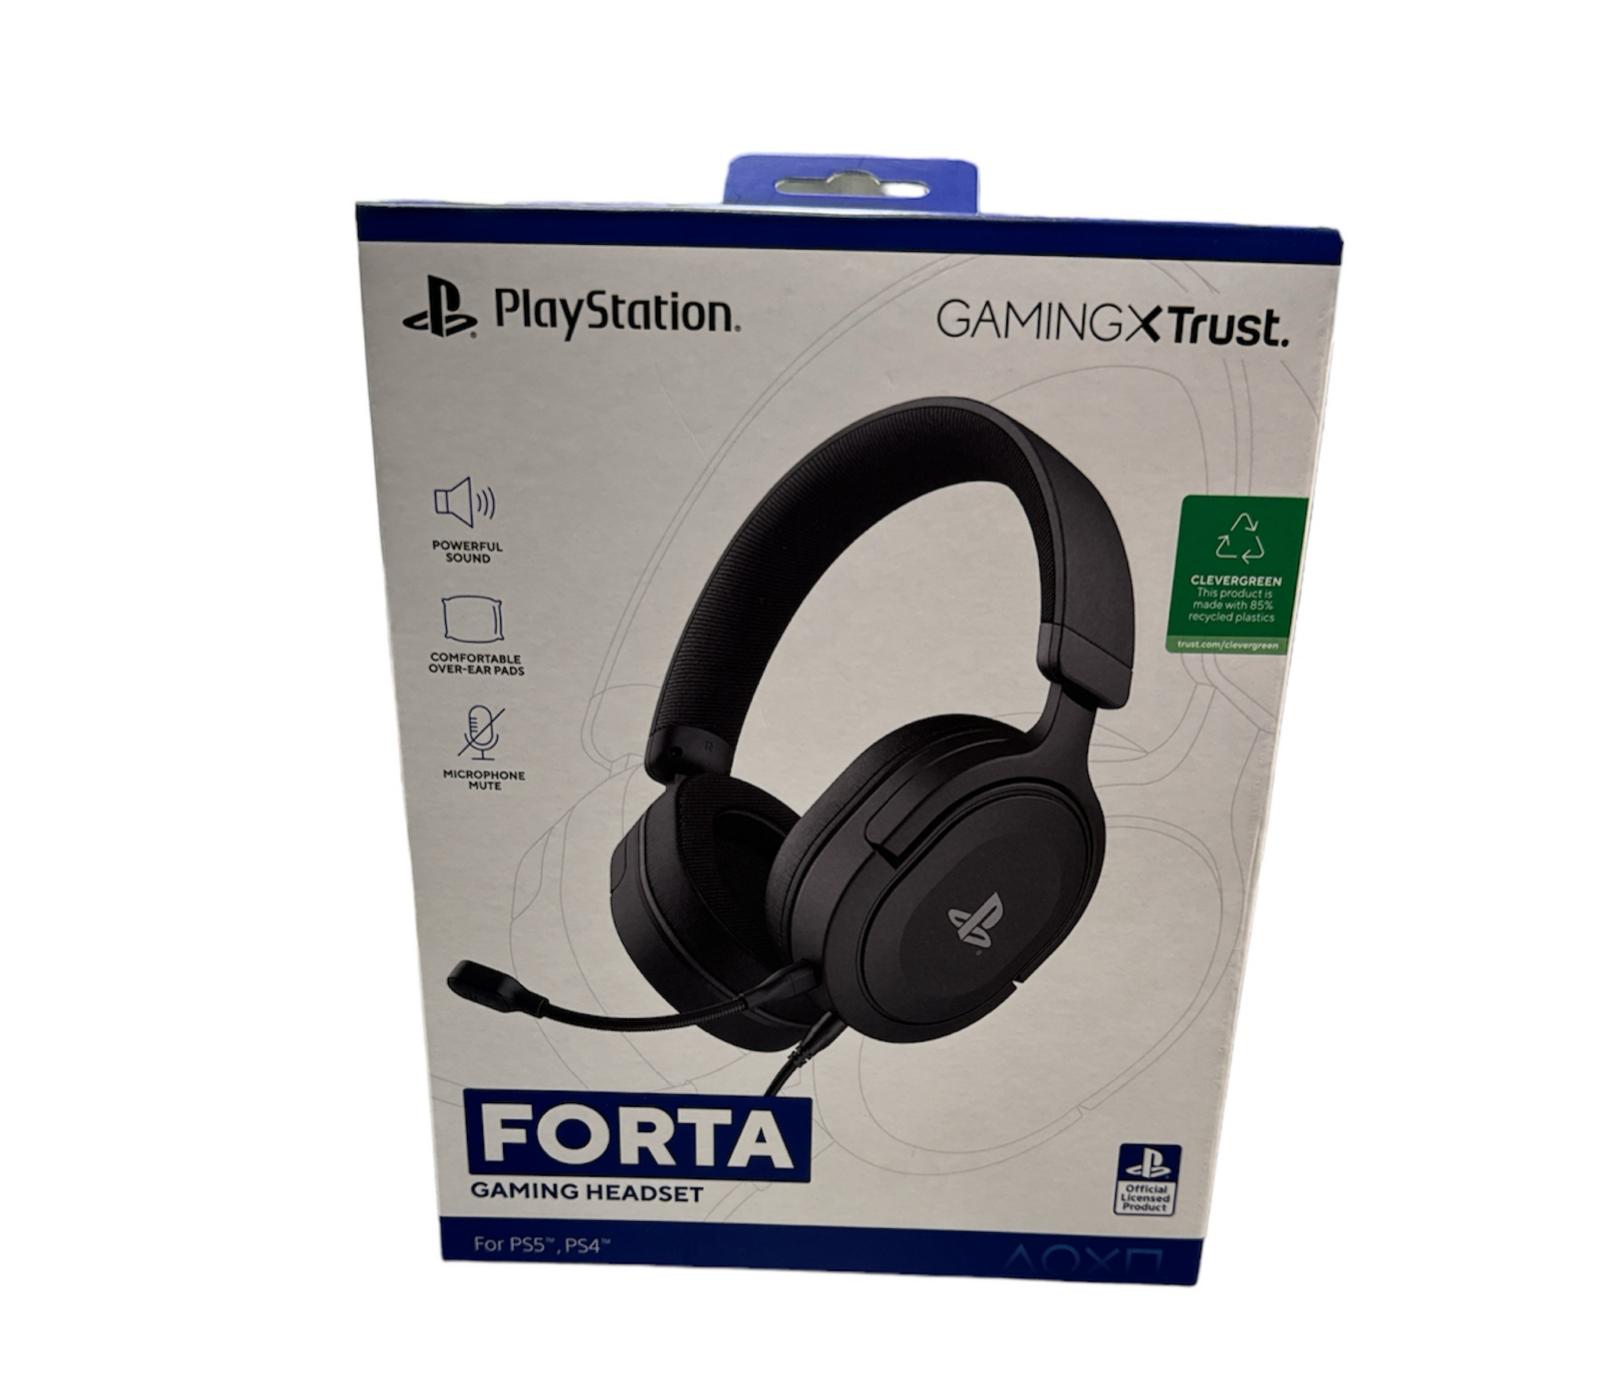 Playstation  Forta Gaming Headset For Ps5/Ps4